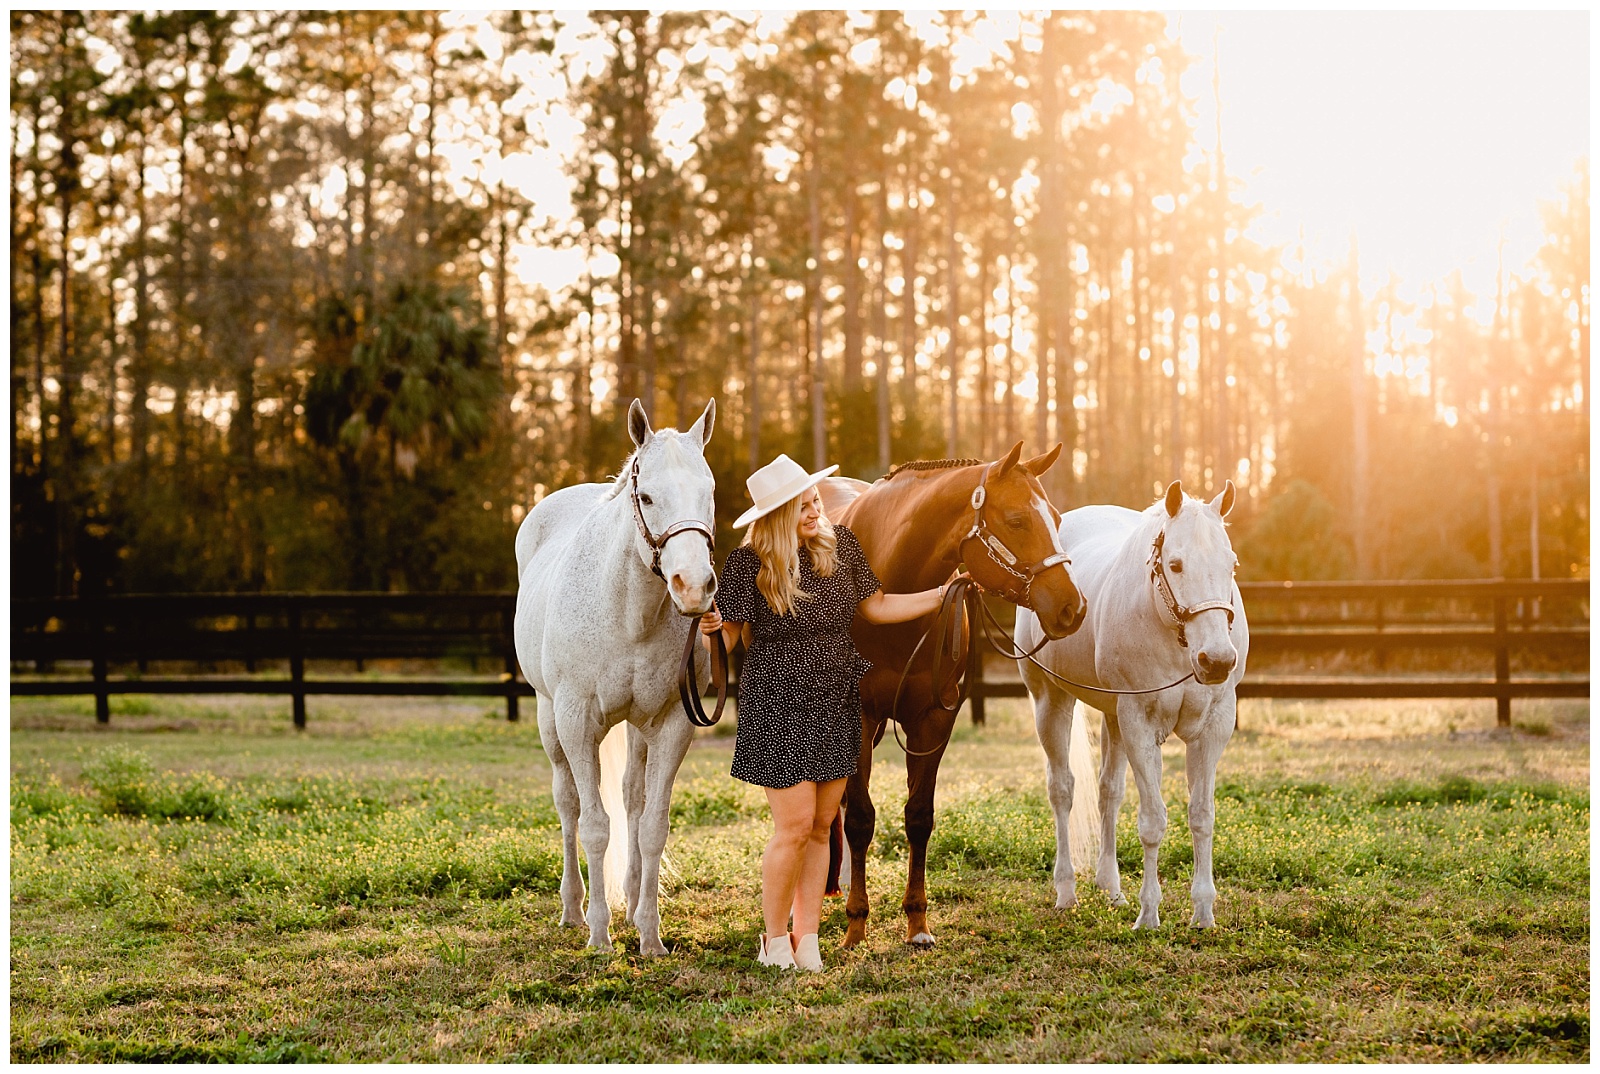 Tampa equestrian photoshoot with three western pleasure horses during golden hour.